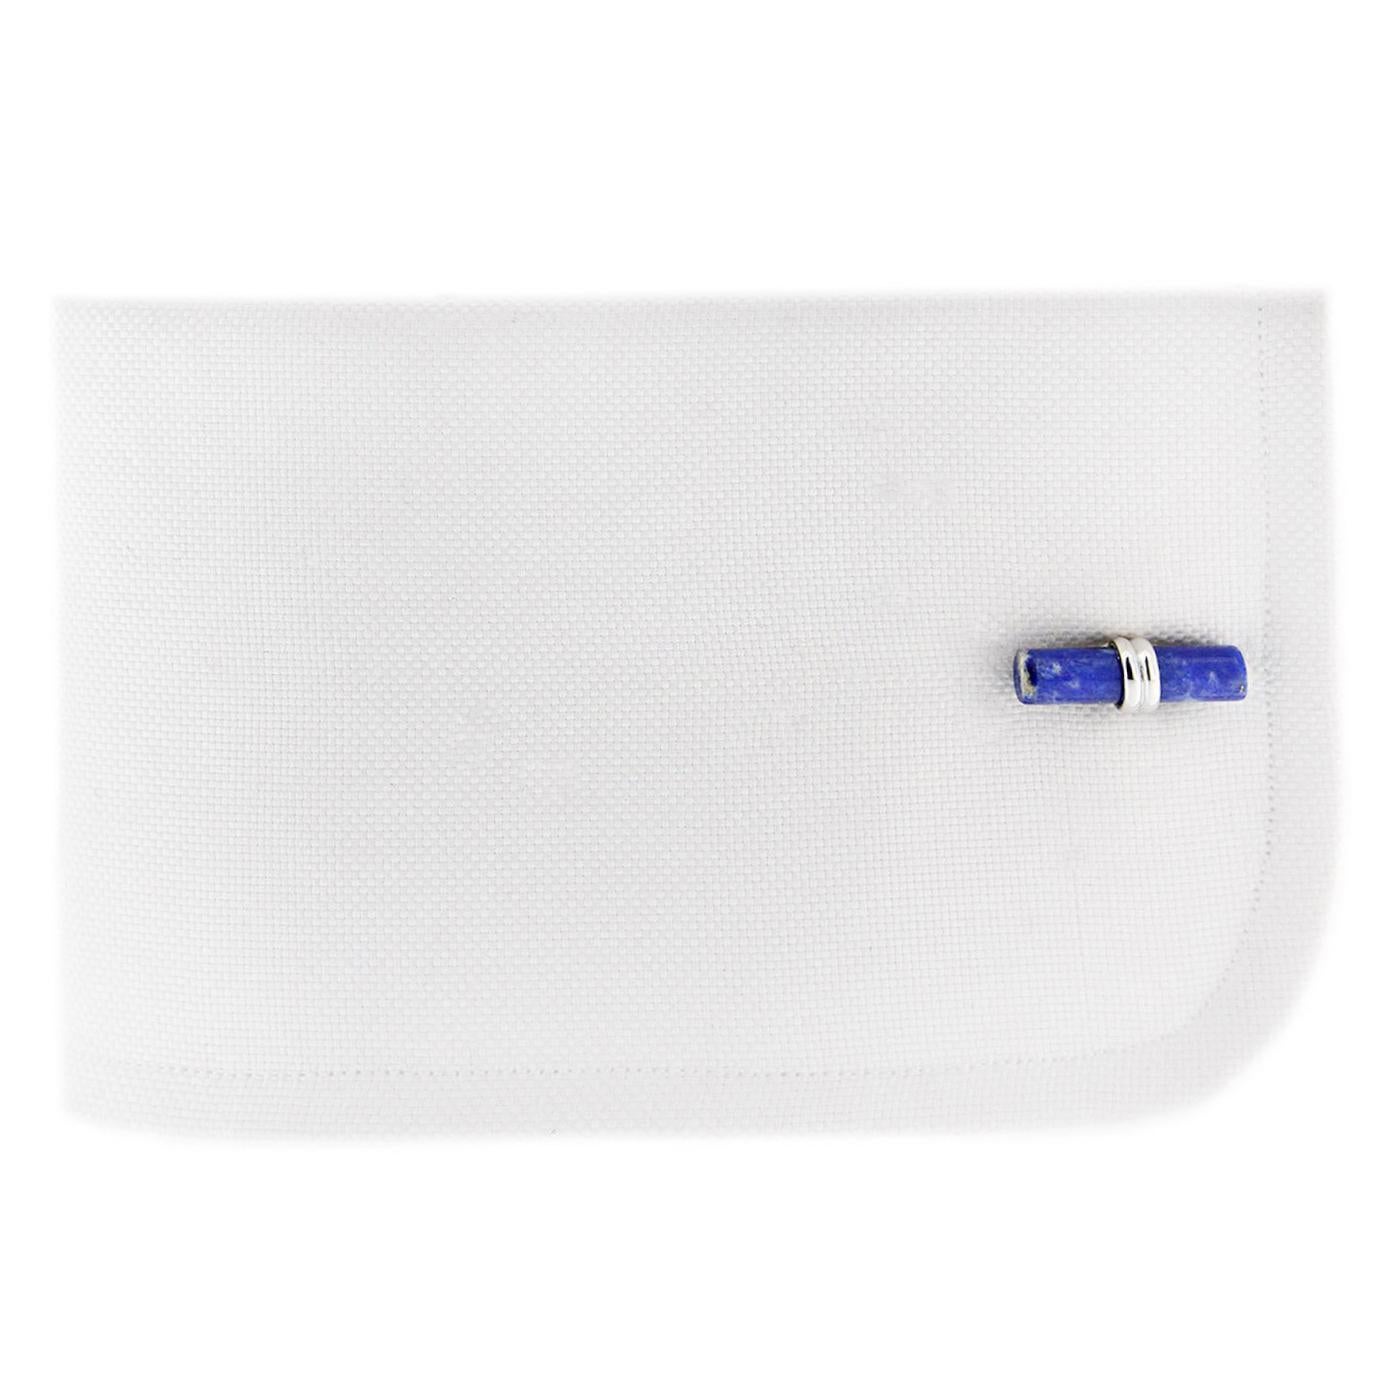 Jona design collection, lapis lazuli cufflinks, mounted in 925/°°° sterling silver Rhodium Plated. Marked JONA 925.
Measurements: 19.2mm x 5.4mm (each cylinder). 
All Jona jewelry is new and has never been previously owned or worn. Each item will